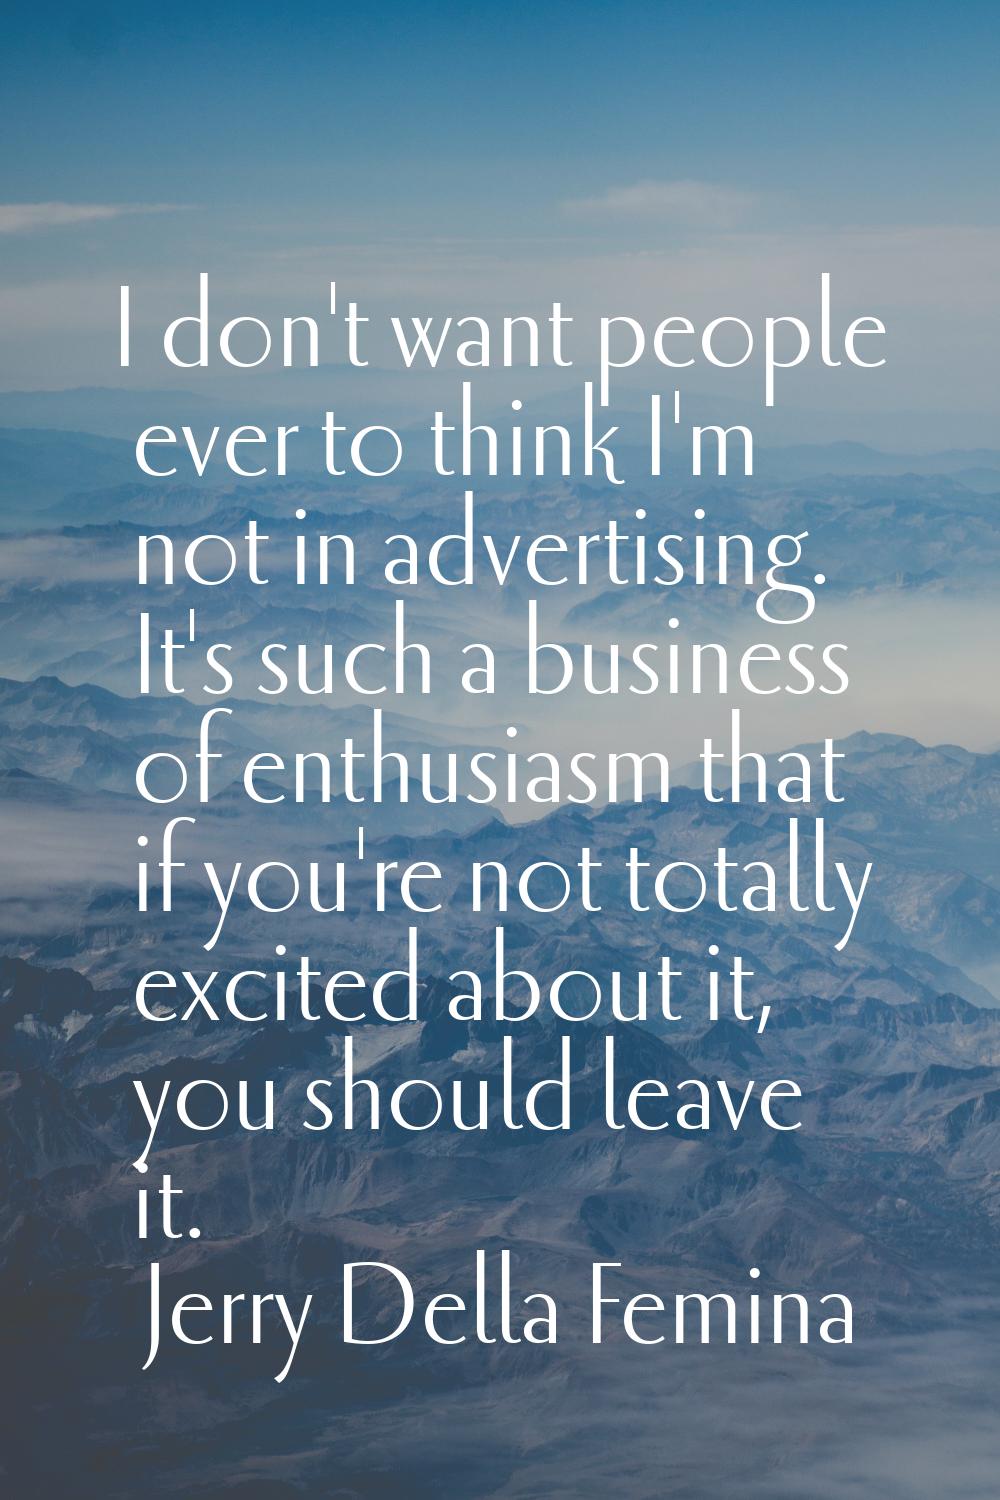 I don't want people ever to think I'm not in advertising. It's such a business of enthusiasm that i